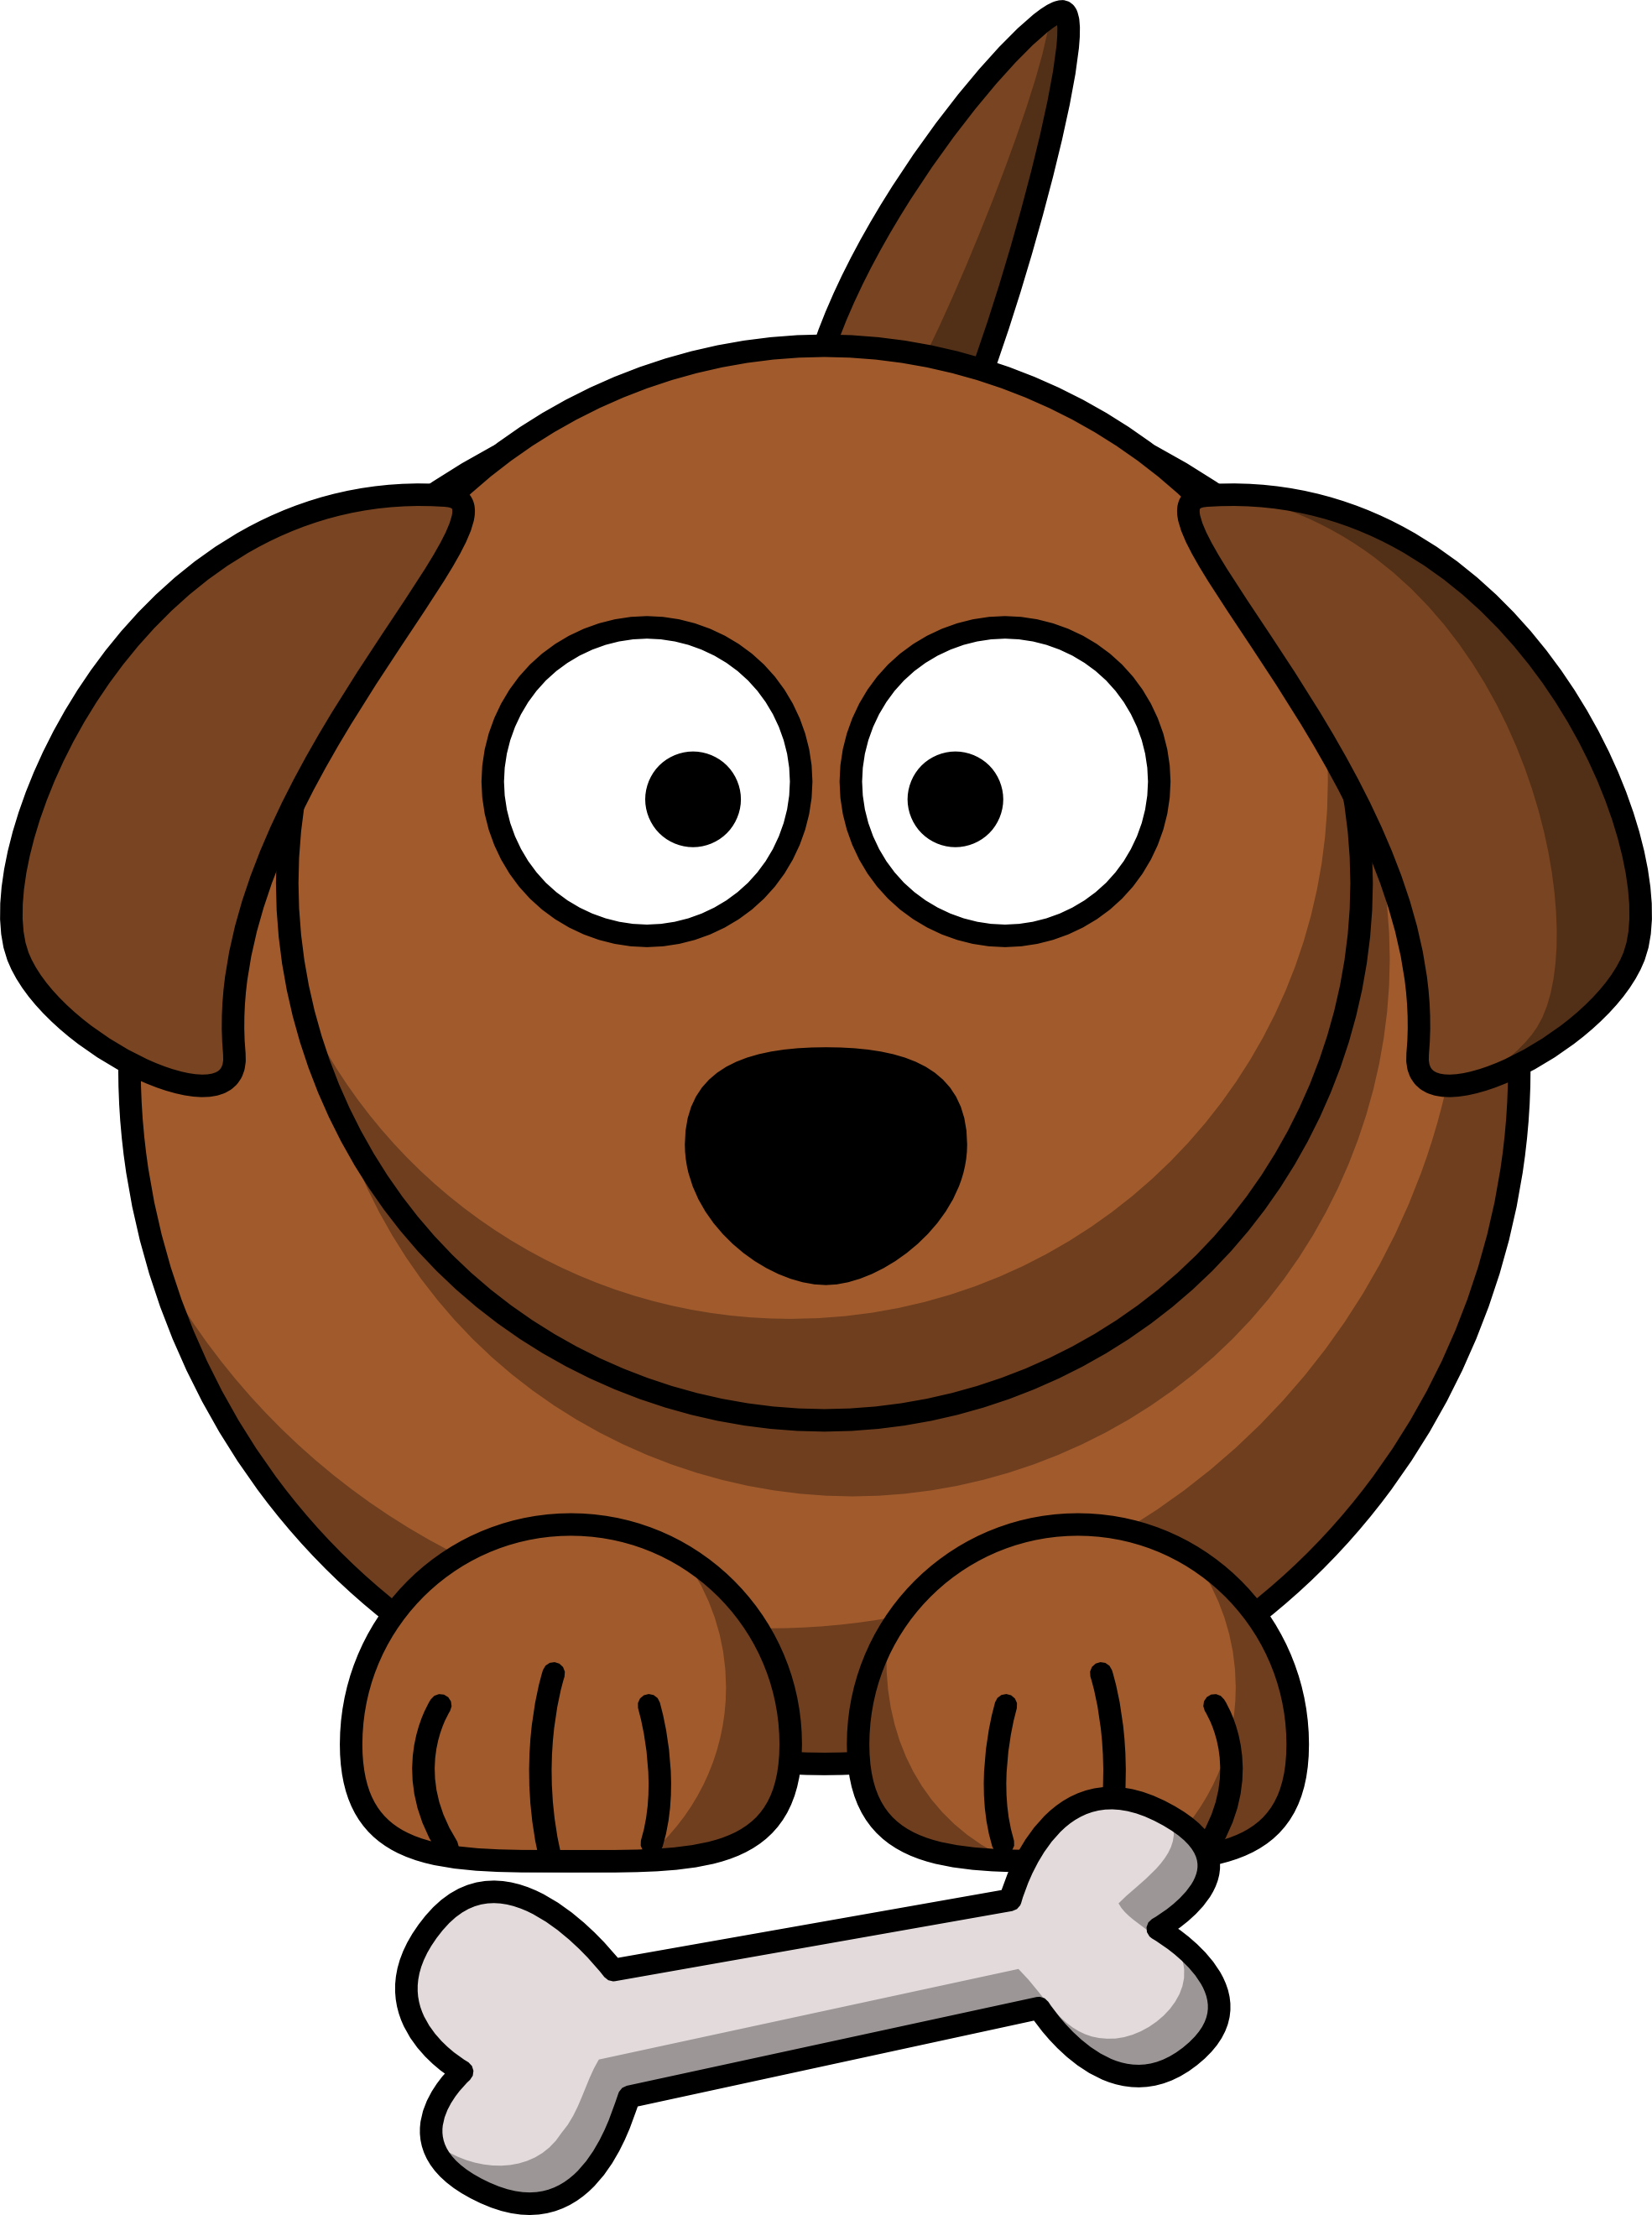 Cute Dog Face Clipart | Clipart Panda - Free Clipart Images